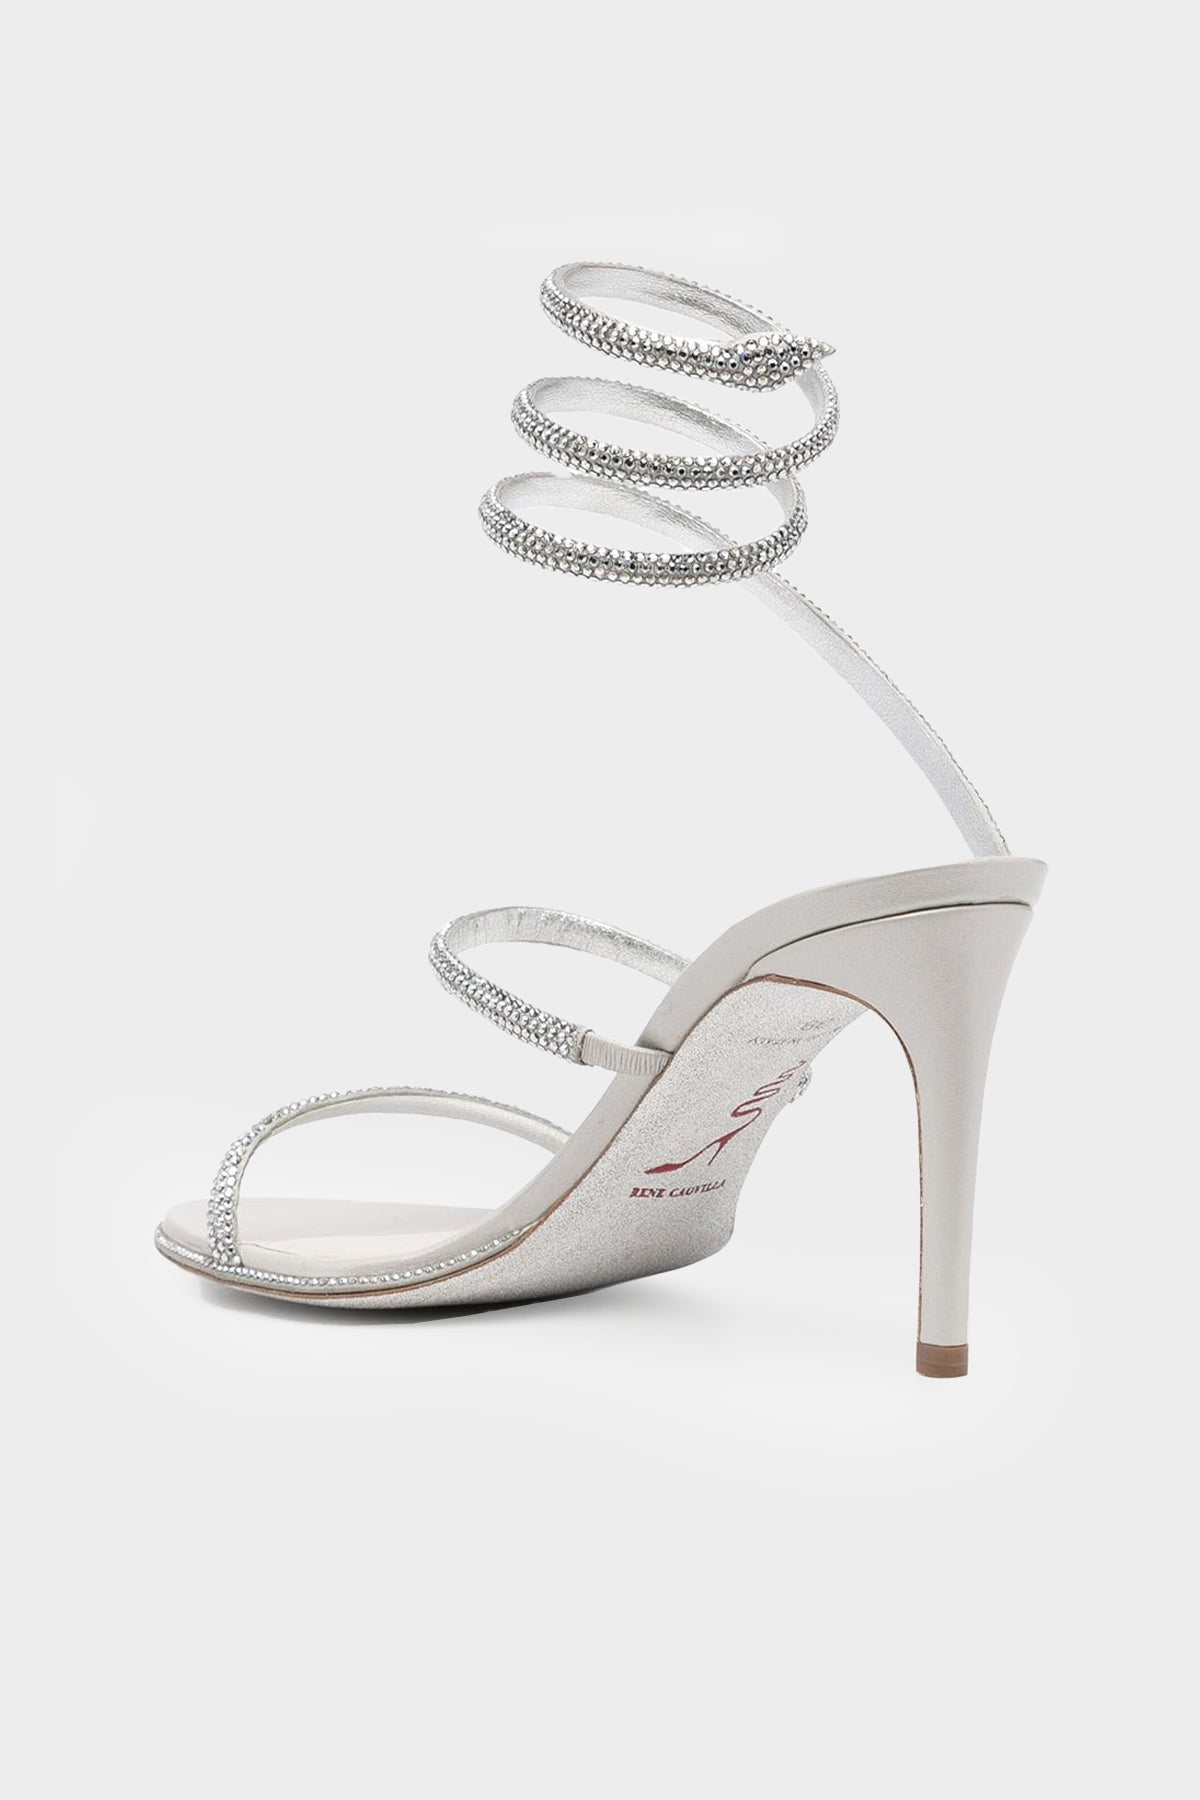 Cleo Crystal 80 Wrap Sandals in Silver - shop-olivia.com